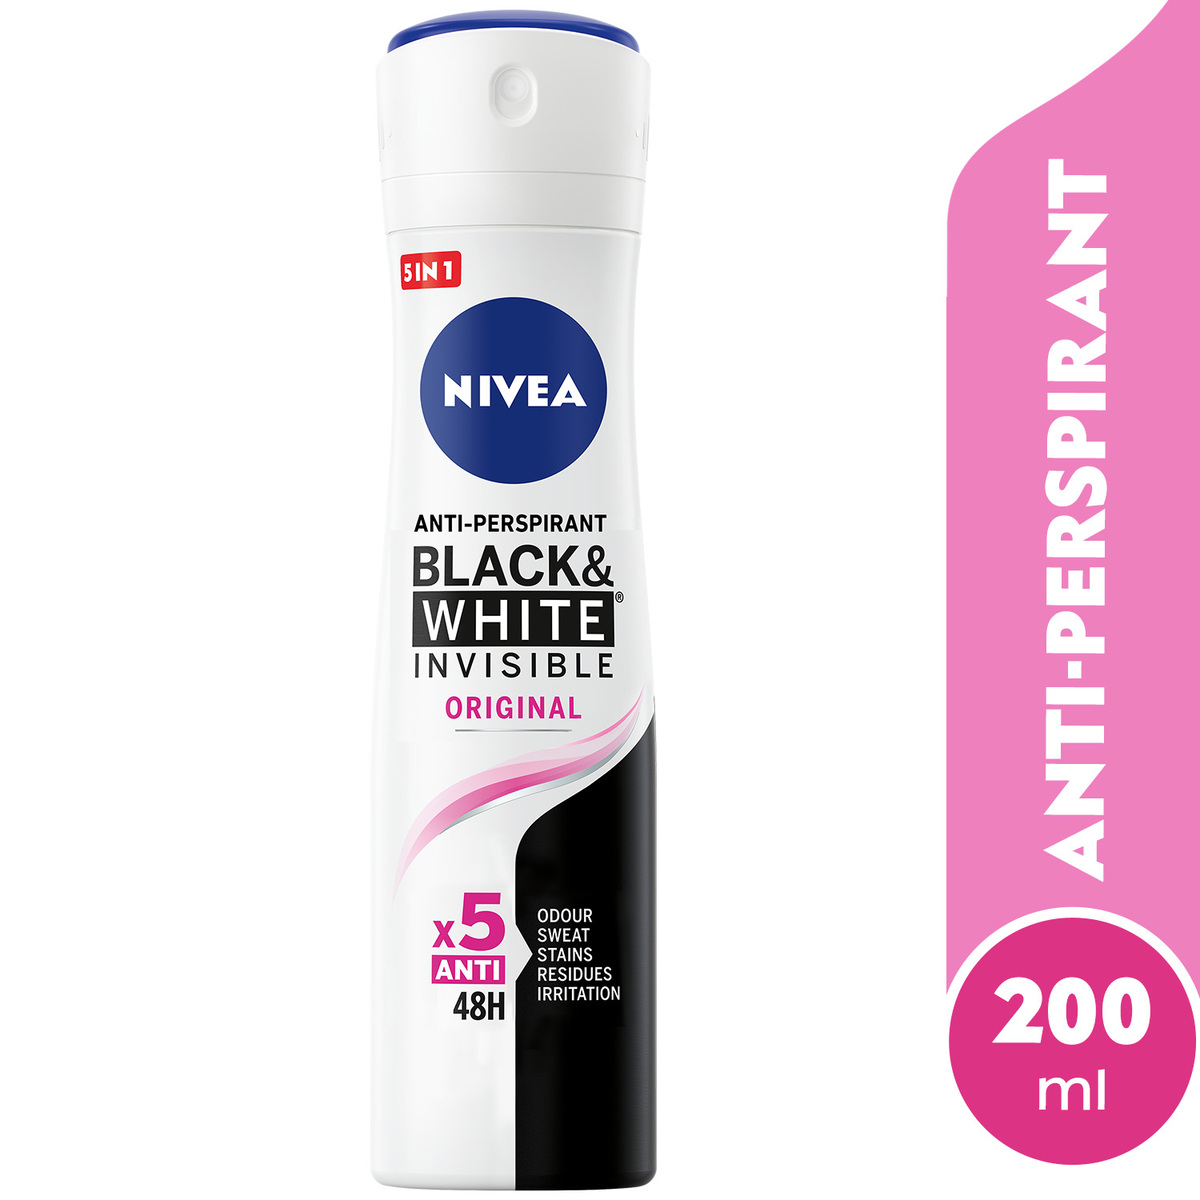 Buy Nivea Deodorant Spray Invisible For Black & White 200 ml Online at Best Price | Female & Unisex Deo | Lulu Kuwait in Kuwait